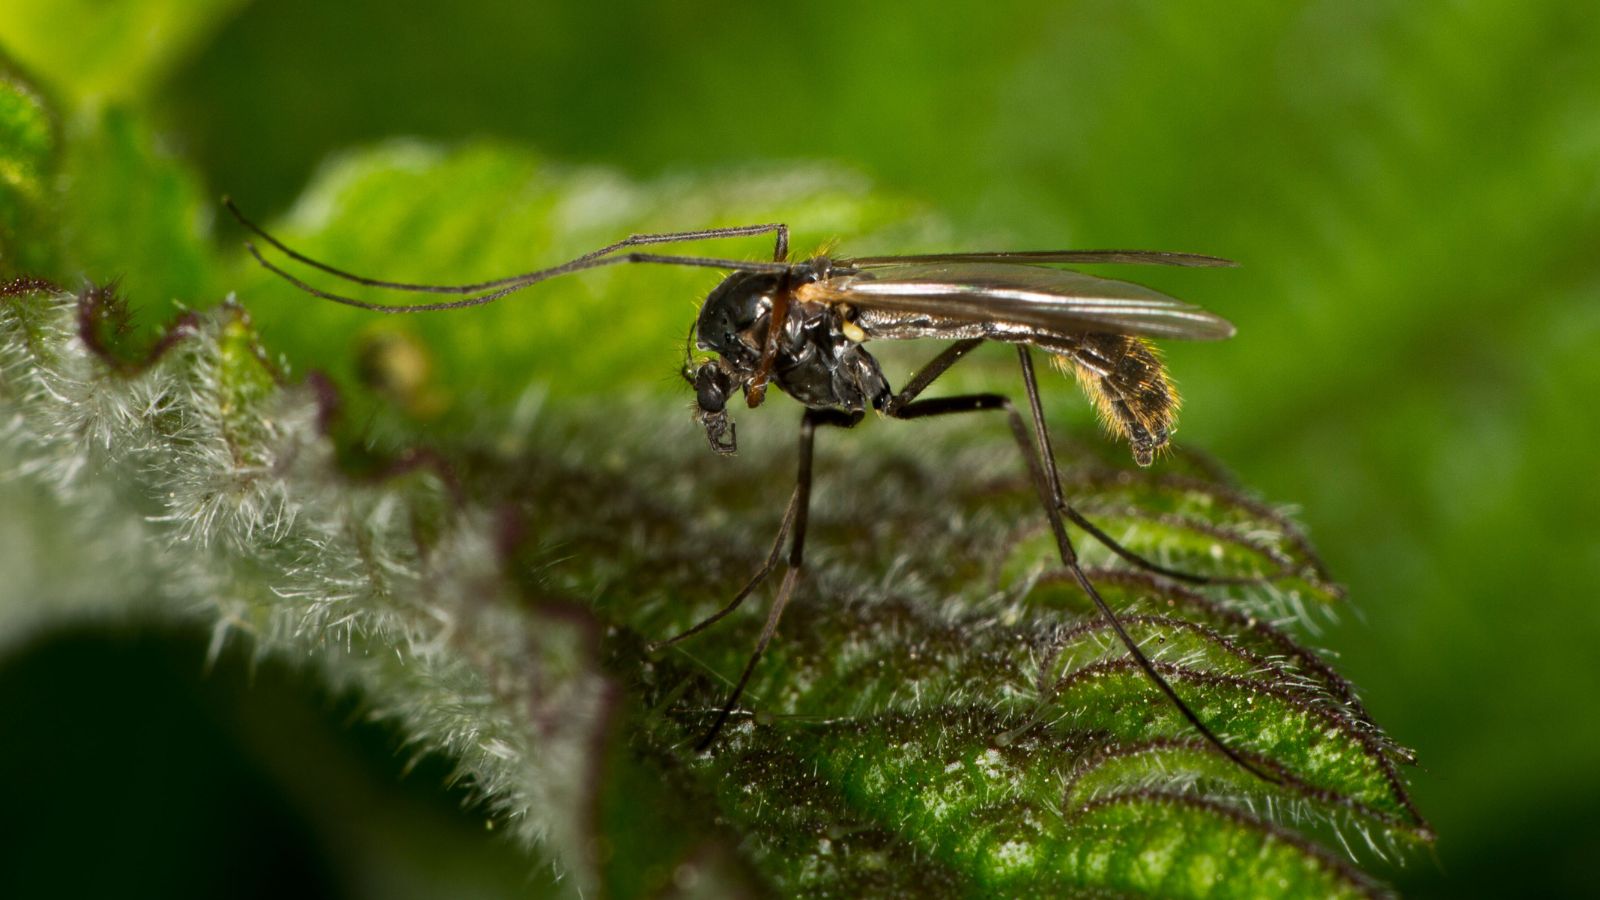 How to get rid of gnats: 12 methods to dispel ghastly gnats